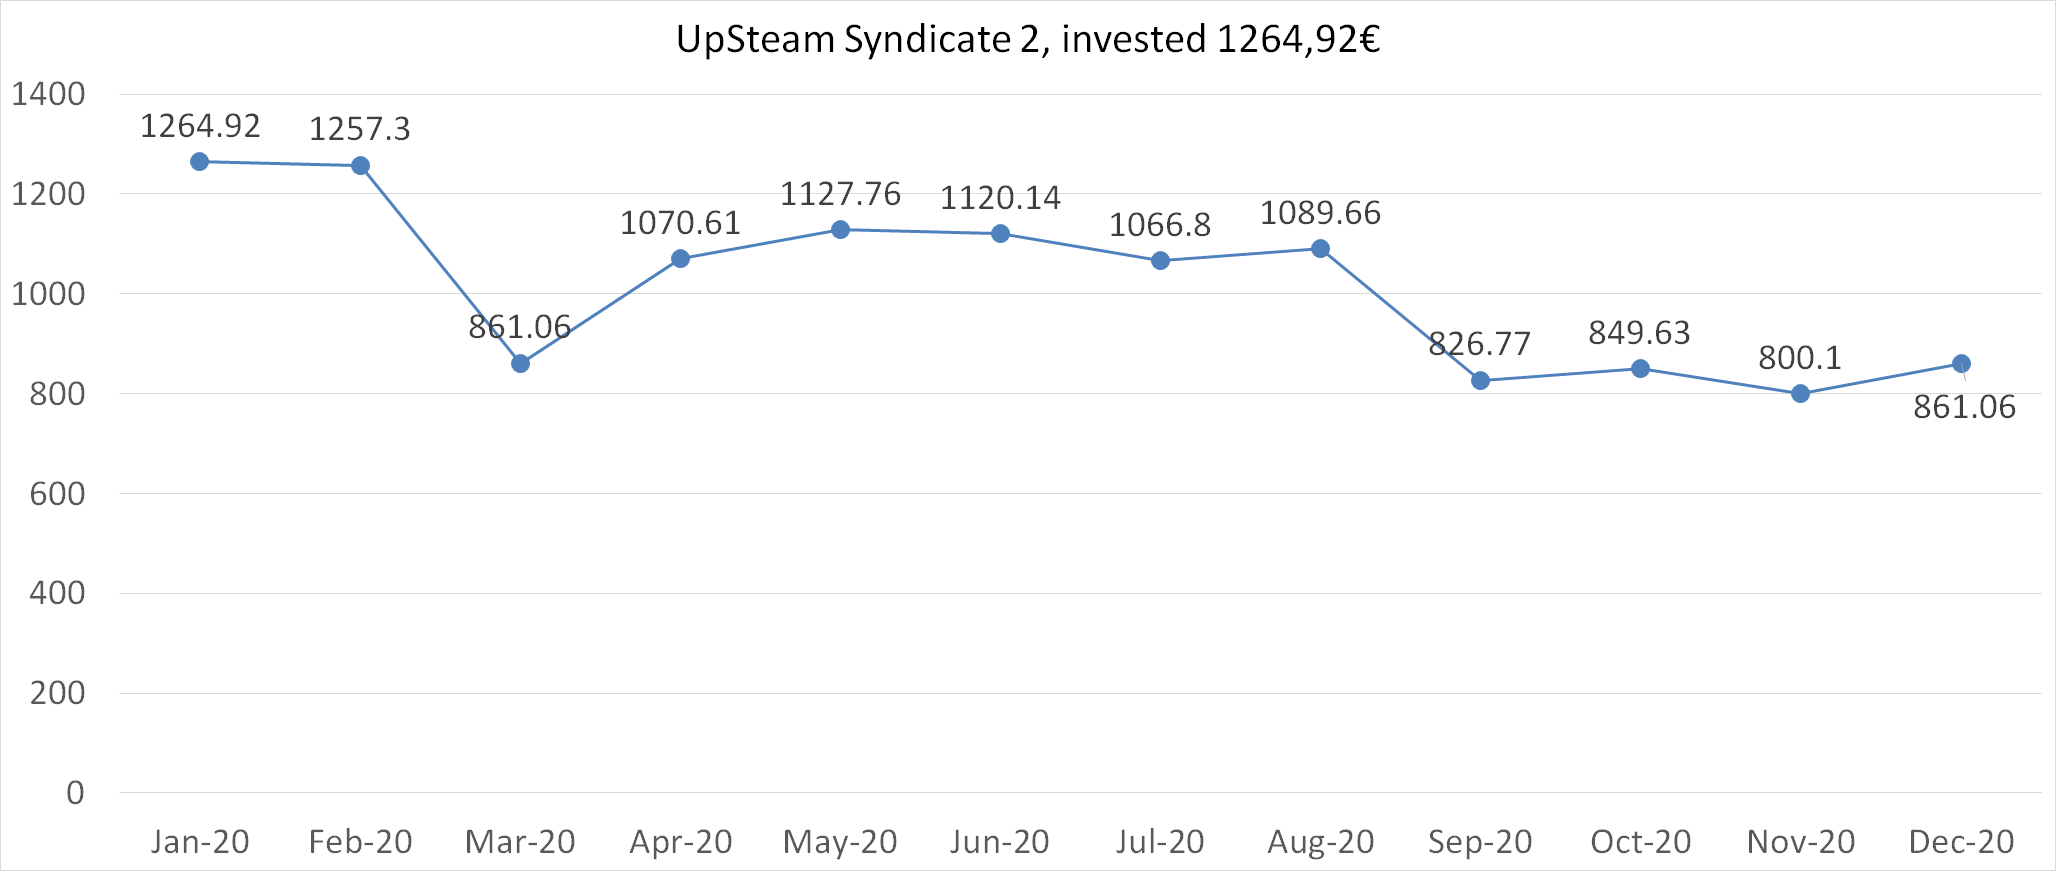 upsteam syndicate 2 investment worth december 2020